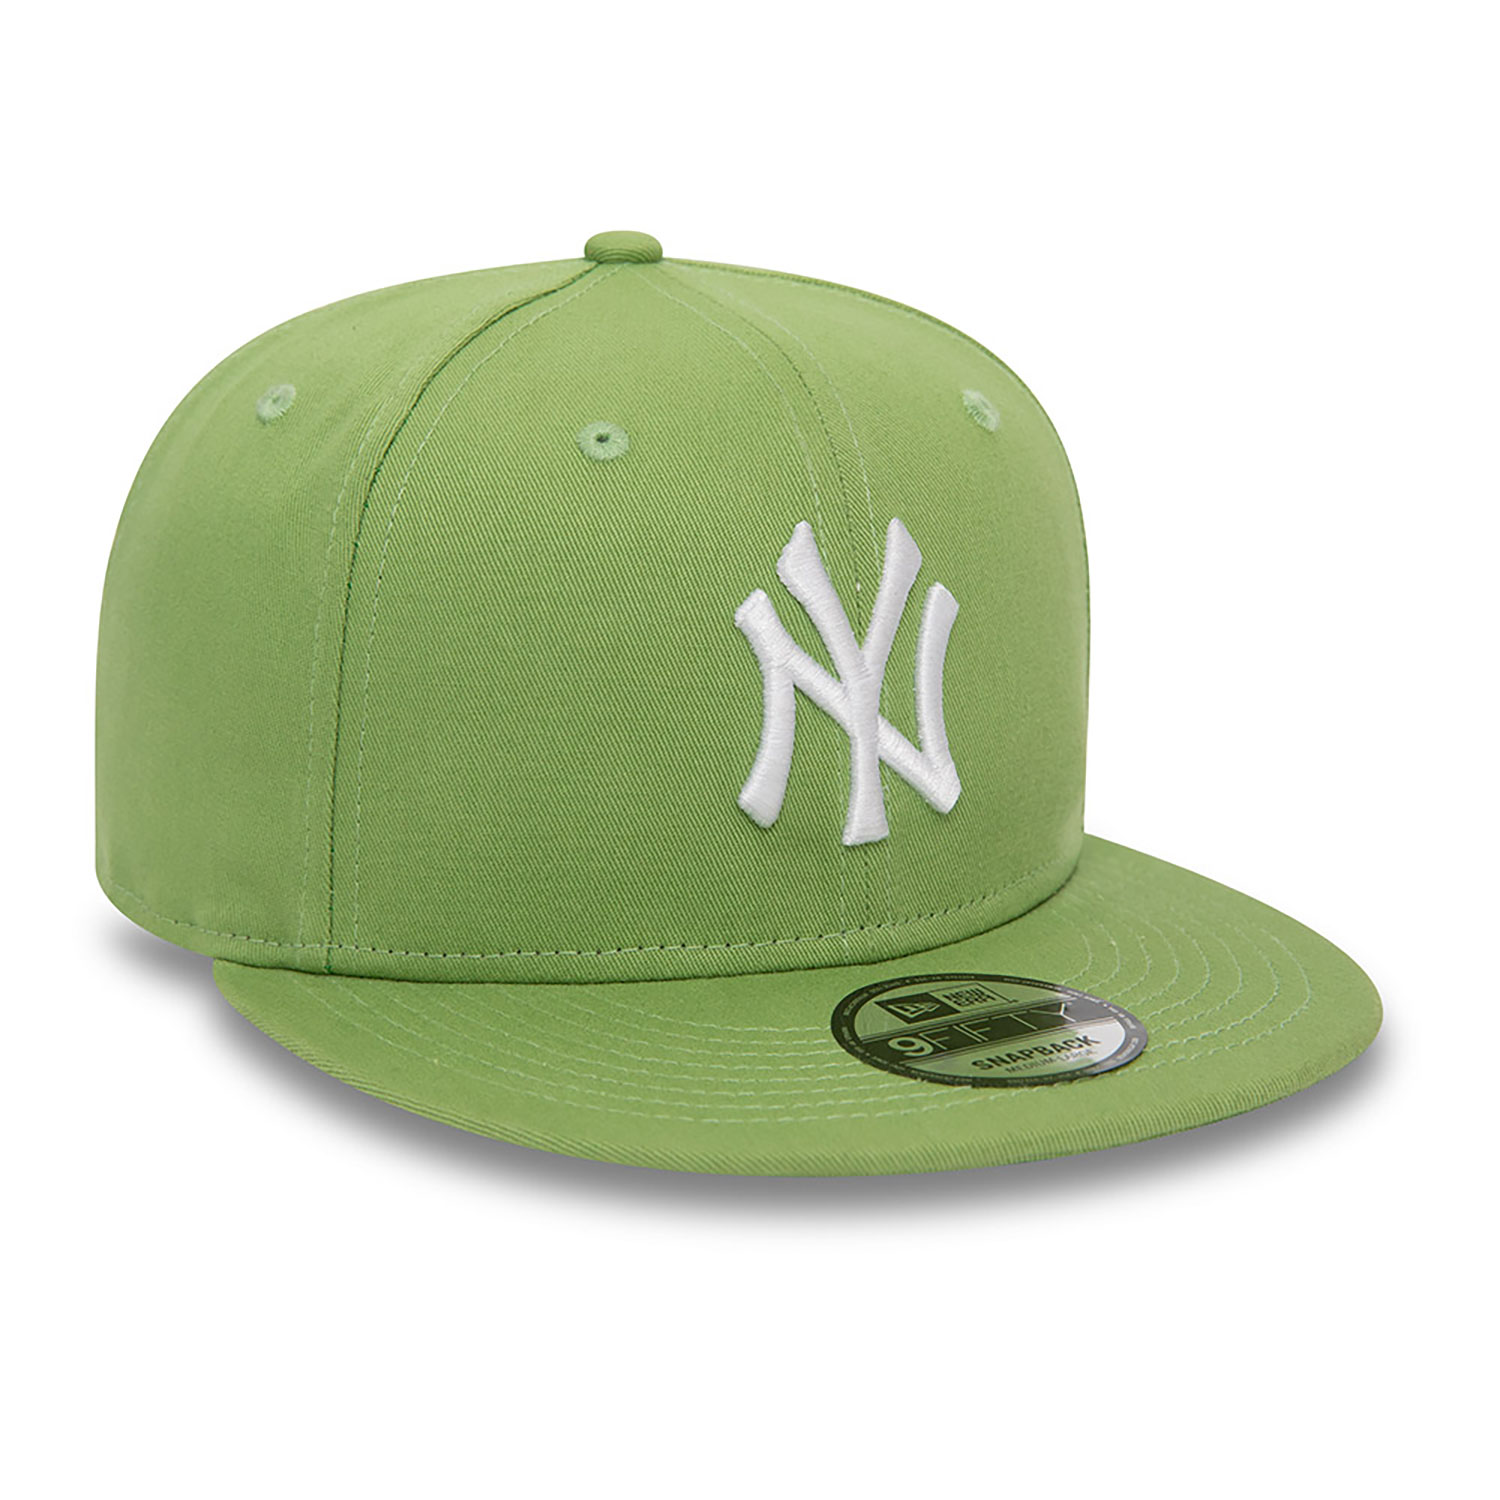 New York Yankees League Essential Green 9FIFTY Adjustable Cap